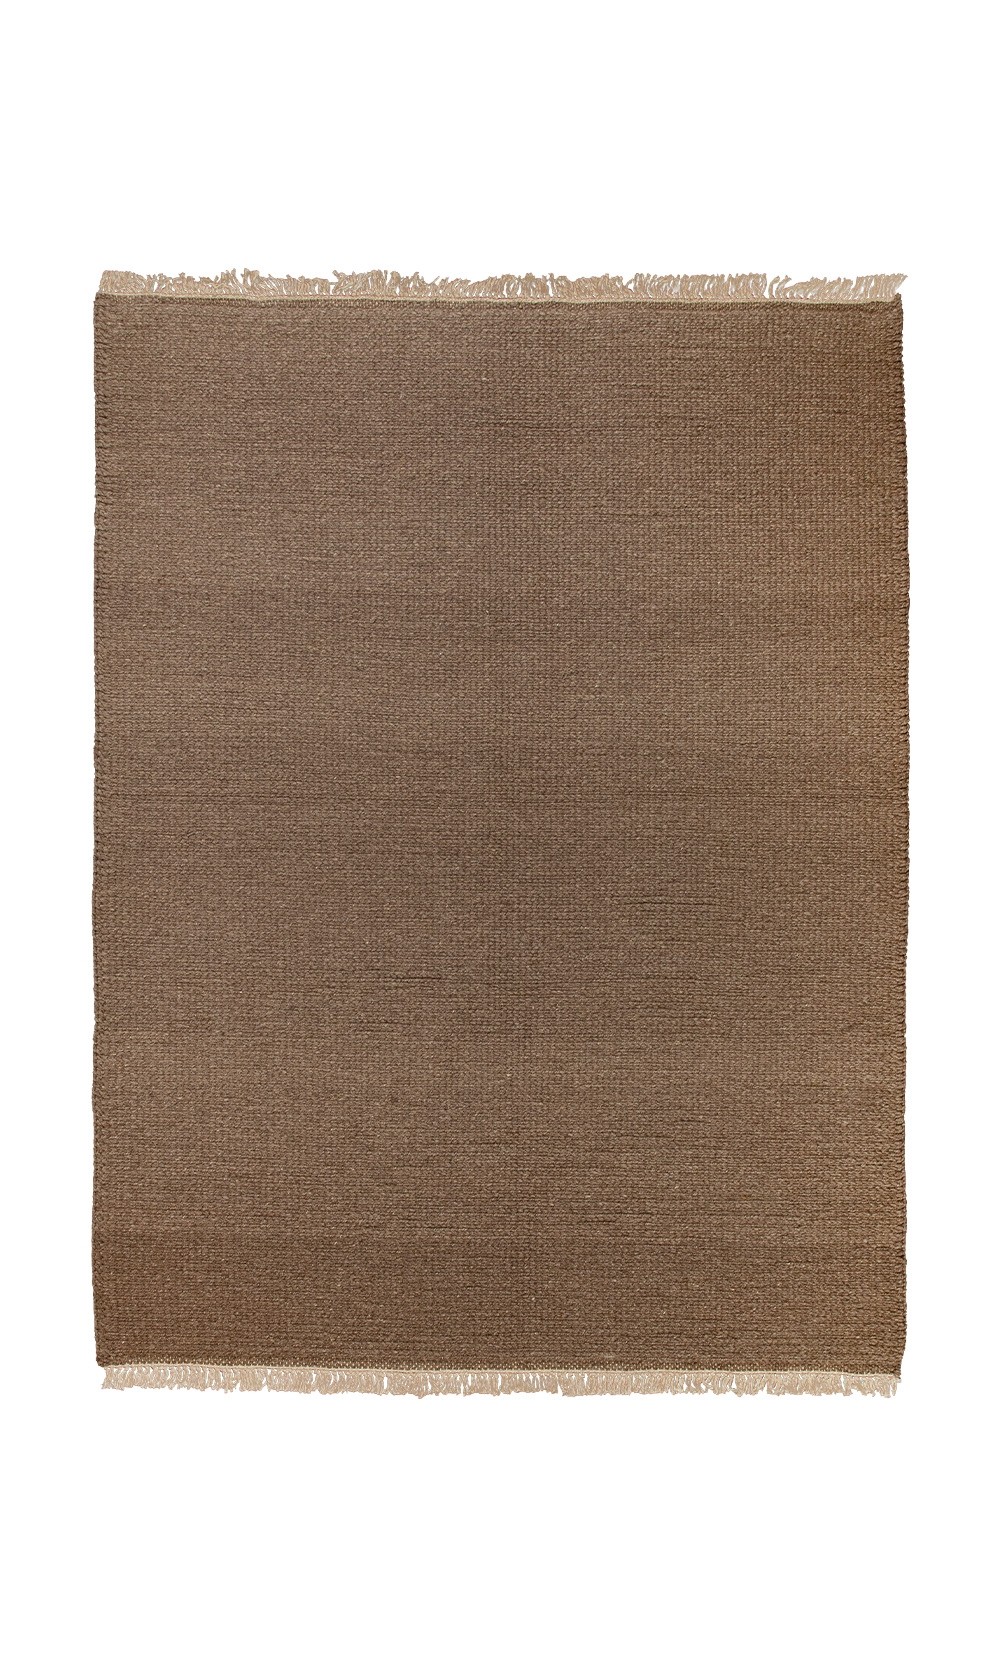 Brown Moroccan Type Rug | 4 sq.m | cotton material